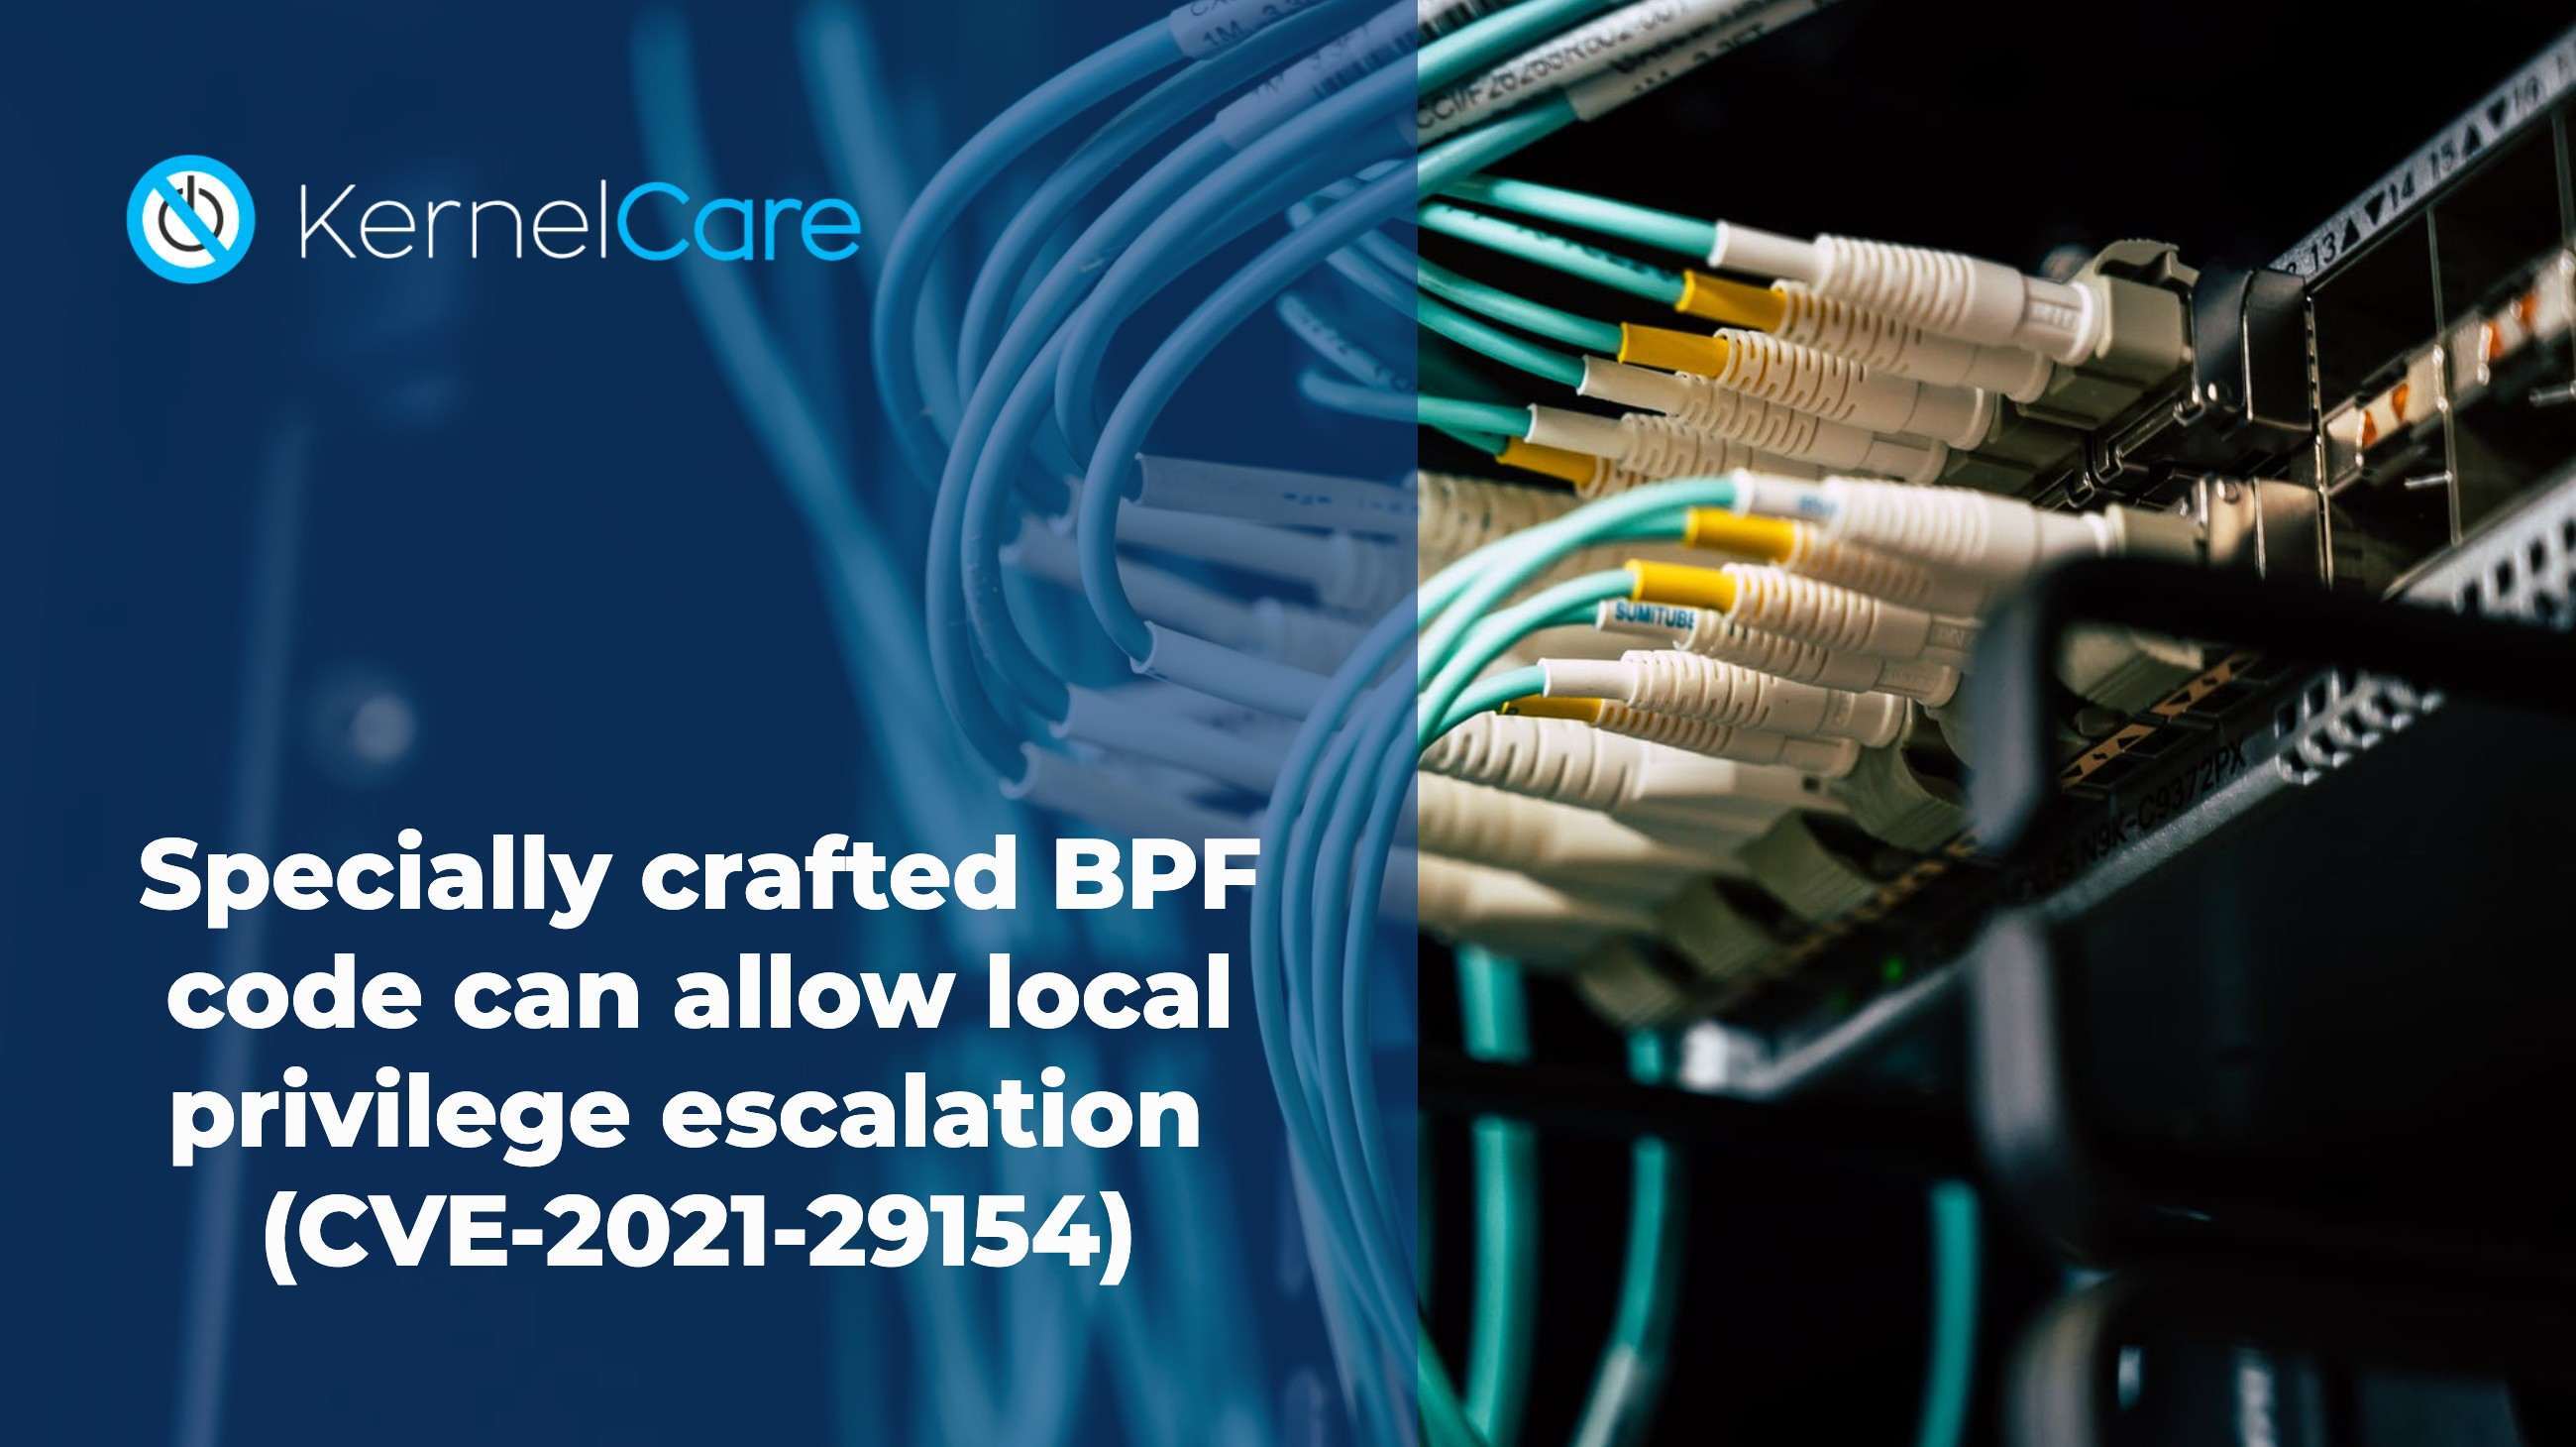 Another vulnerability targeting the BPF subsystem has been disclosed publicly in the past few days (CVE-2021-29154). It allows users on a system running non-default configuration of the BPF subsystem to run specially crafted code as a BPF filter and run arbitrary executable code in the kernel context.   According to vendors, it affects all distributions running kernels up to version 5.11.12. Distribution vendors are starting to deliver patches through their update mechanisms, and KernelCare is also finalizing patches for it’s rebootless patching process to address this issue.  Because of the nature of the BPF functionality, which is to allow user code to interact with network packet processing within the kernel, there is a very big potential for attack given any weakness in the implementation. This specific functionality has been addressed recently in the specter mitigation code bug discussed here.  To be vulnerable, a system would have to be configured to allow BPF JIT compilation (for example, by setting “net.core.bpf_jit_enable = 1”). This is often the case in situations where regular users are doing work related to sockets’ manipulation or in seccomp (secure computing mode) environments where permissions are granted more granularly than normal.  The actual vulnerable code resides in arch/x86/net/bpf_jit_comp.c and arch/x86/net/bpf_jit_comp32.c in the kernel source code tree. The flaw comes from the way branch displacement happens when the user code is compiled, by making wrong assumptions regarding the address of code during optimization.  Proper exploitation of this vulnerability could even lead to container or chroots’ escape, since the kernel is shared between them, and running code in the kernel context permits it to escape containerization limits.  As a stop-gap procedure, you can quickly disable BPF JIT by running:  # echo 0 > /proc/sys/net/core/bpf_jit_enable   Which will persist until reversed or a system reboot. A more permanent removal can be achieved by using your distribution’s syscfg equivalent utility to set “net.core.bpf_jit_enable=0” at boot time. Of course, this type of solution solves the problem by disabling the functionality, which in itself is self-defeating. If you actually had your system configured to use BPF JIT, in all likelihood your use case needed that setting explicitly enabled, and you should rely instead on proper kernel patching, either through your distribution vendor’s patches or through KernelCare’s rebootless process.” width=”2600″ loading=”lazy” style=”width: 2600px;”></p>
<p style=